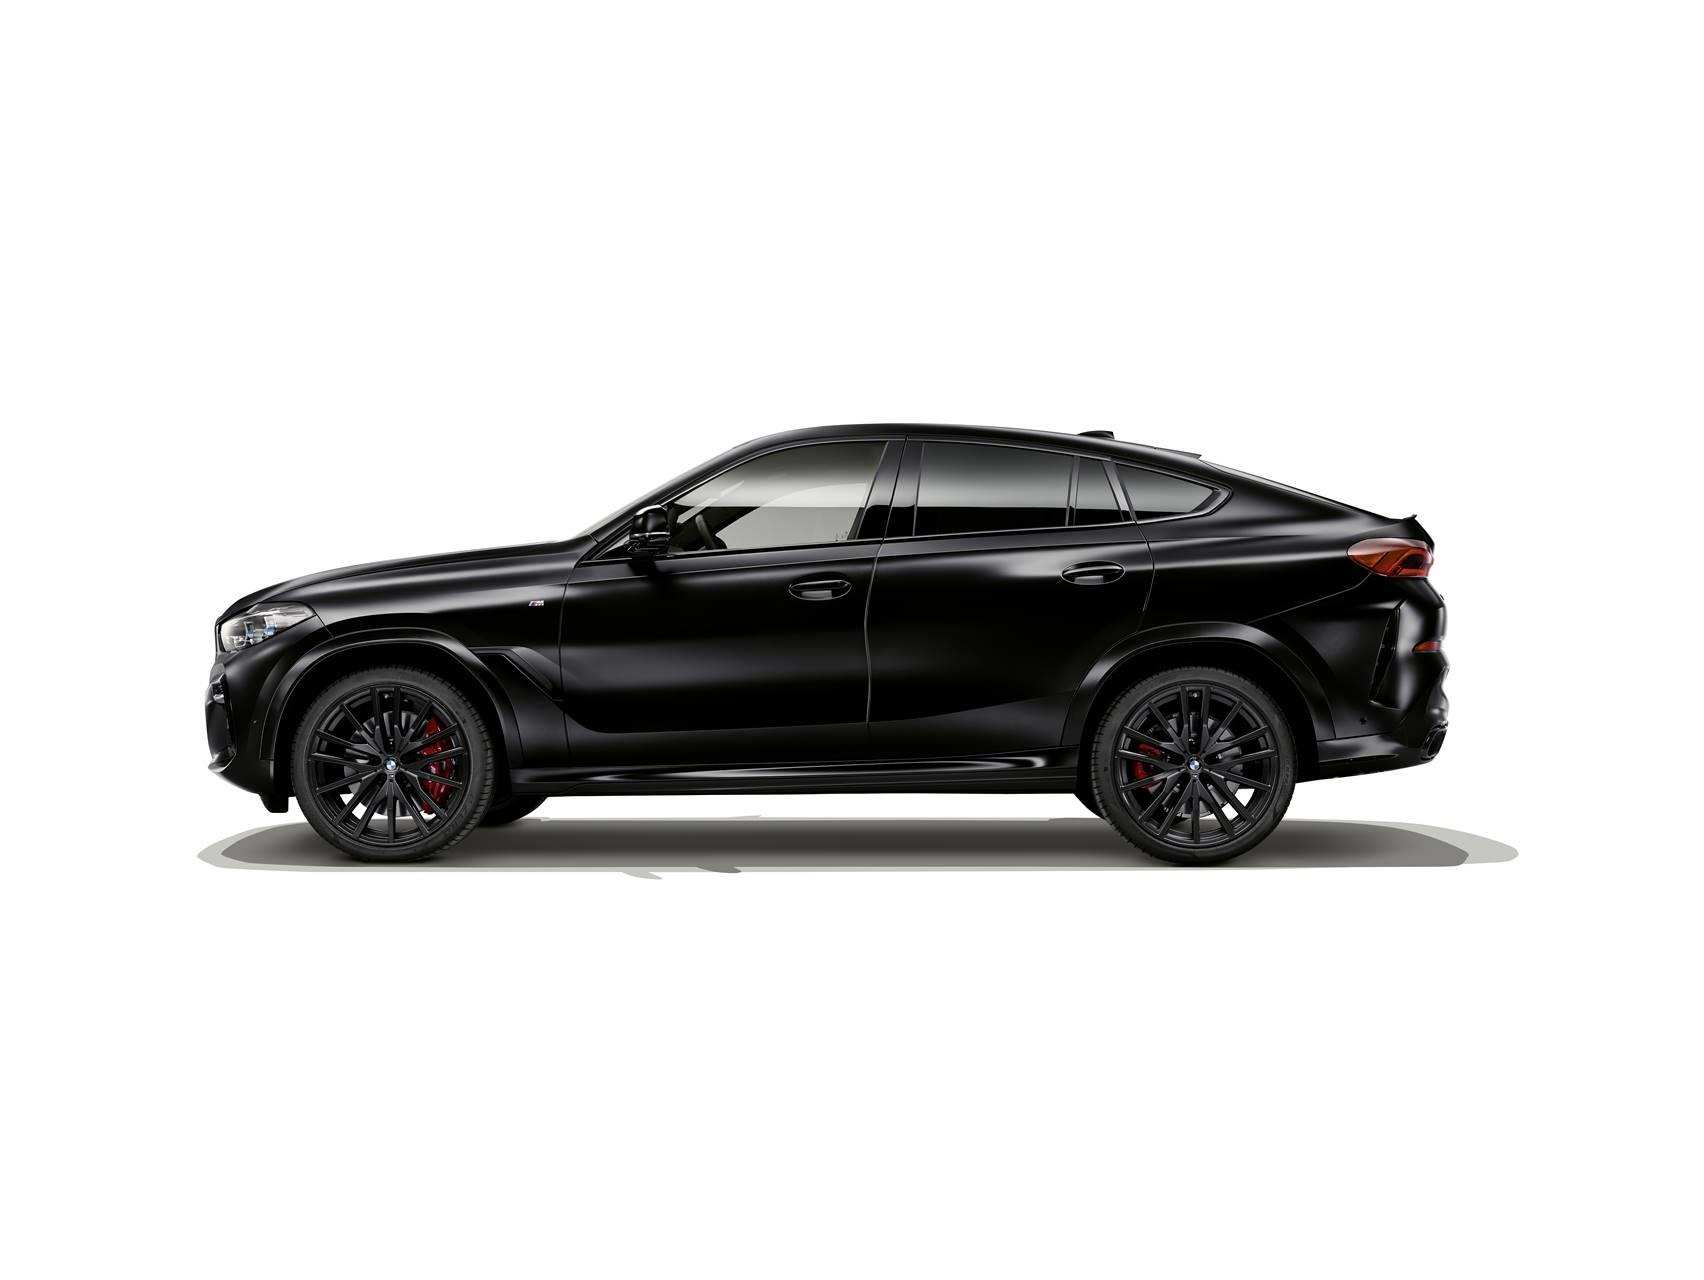 BMW X6 Black Vermilion Limited Edition News and Information